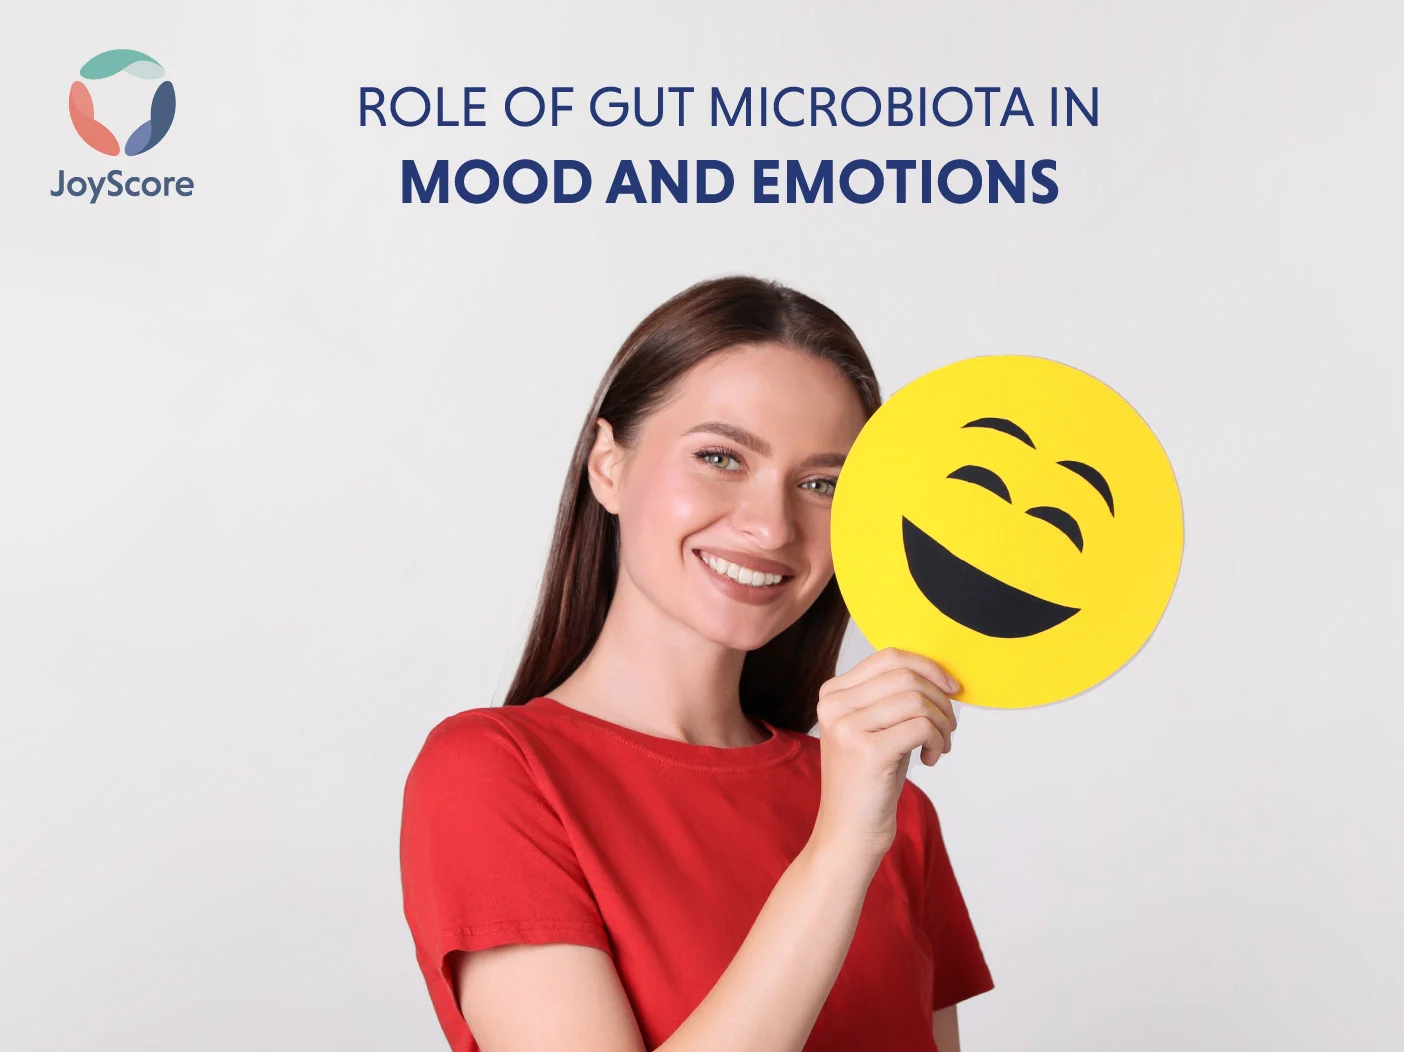 The role of gut microbiota in mood and emotions – understanding the science